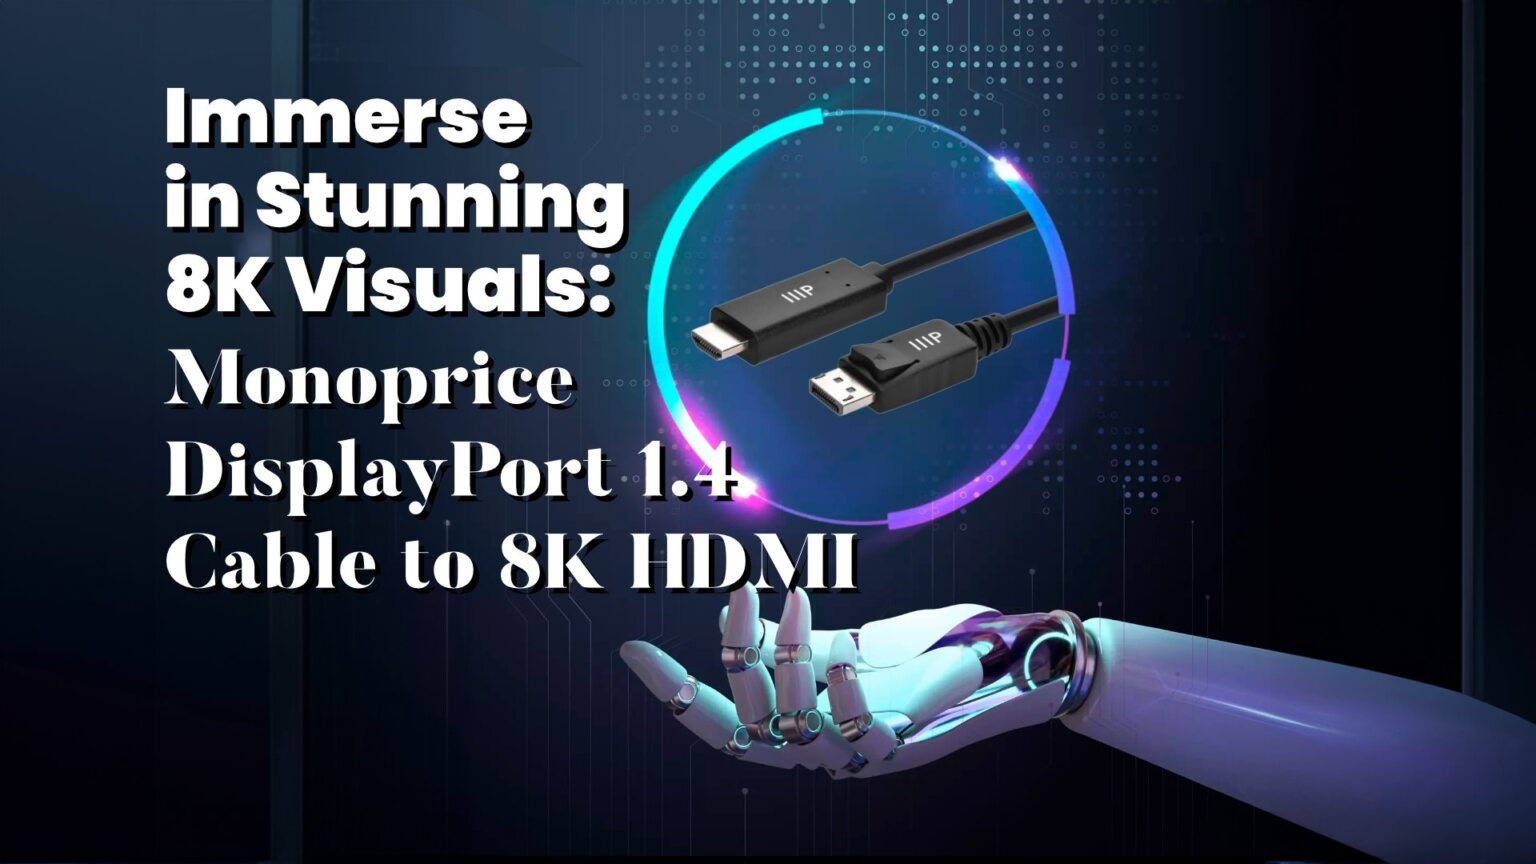 Monoprice DisplayPort 1.4 Cable to 8K HDMI - Unleash the Power of 8K review